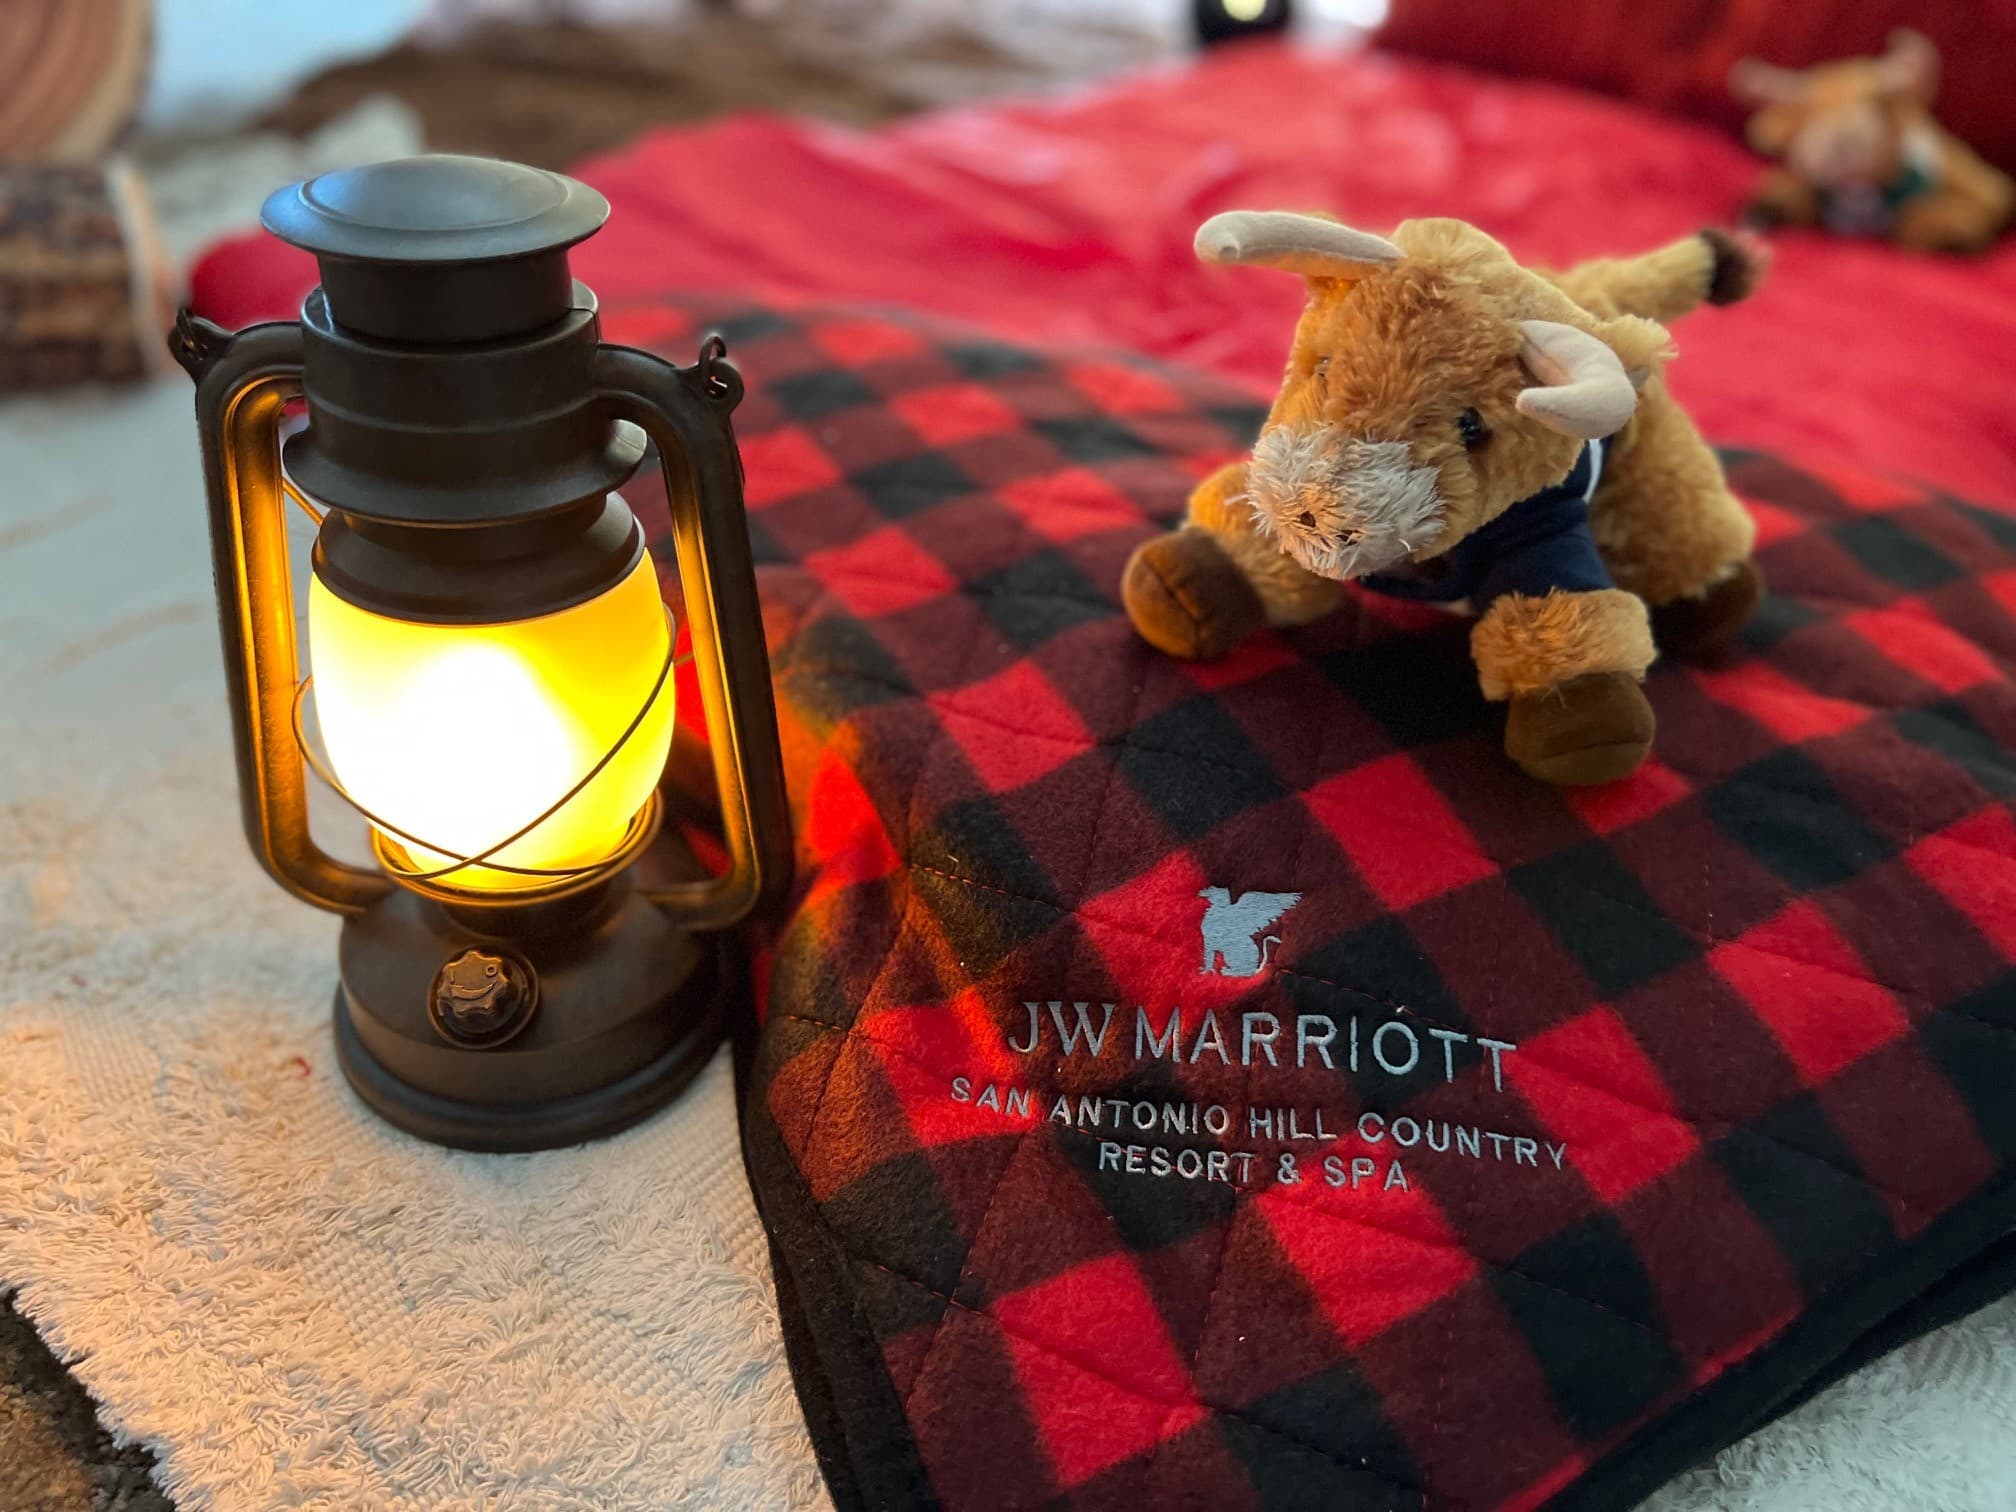 black and red checked sleeping bag with longhorn stuffed animal